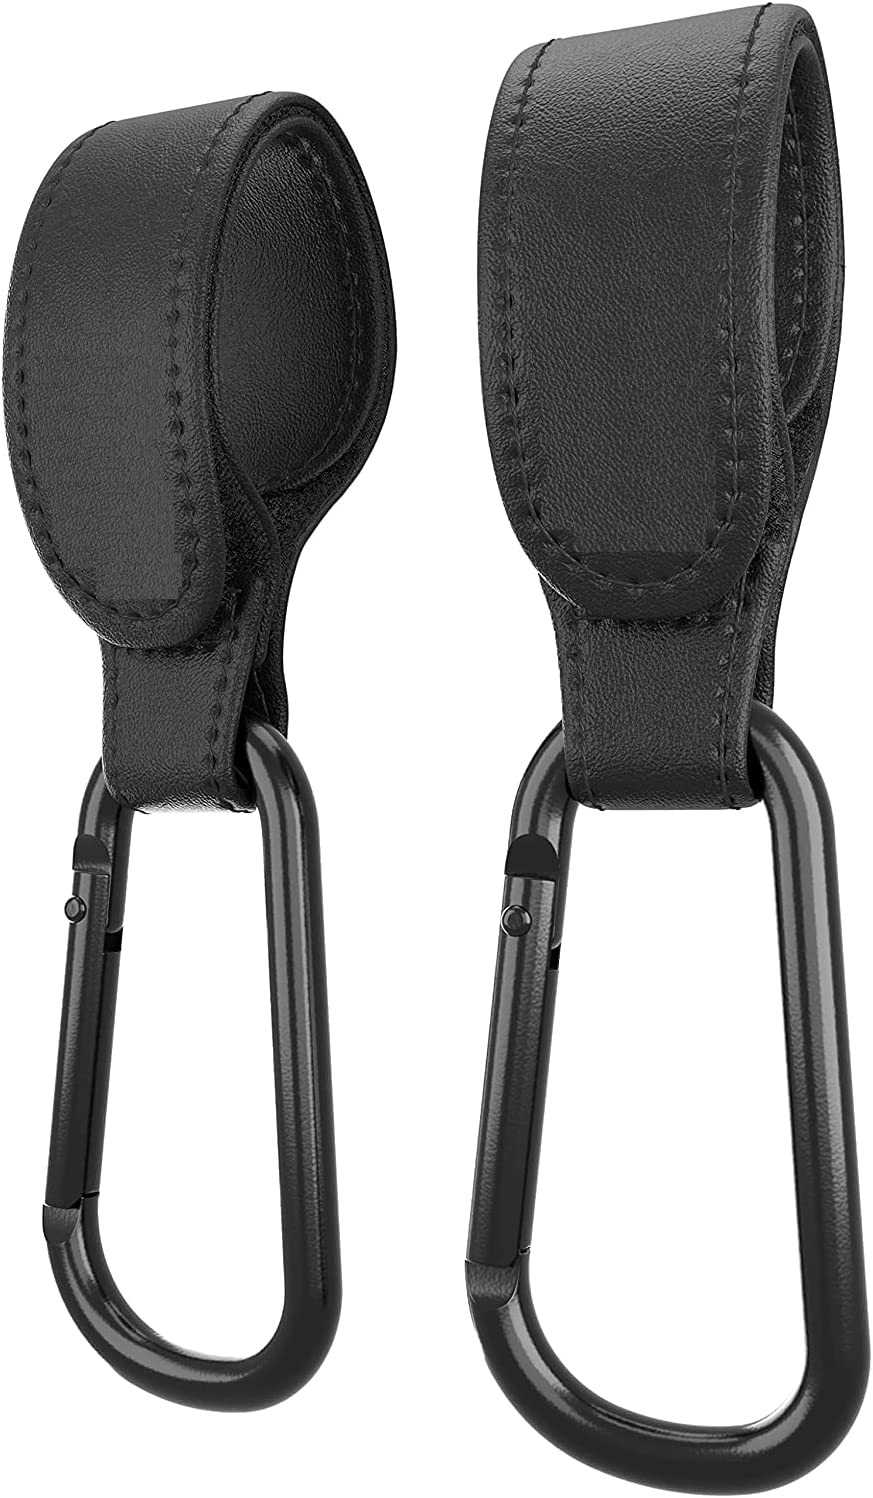 2 Pack Black Leather Style Buggy Clips Pram Clips for Bags for Your Stroller Pram Pushchair